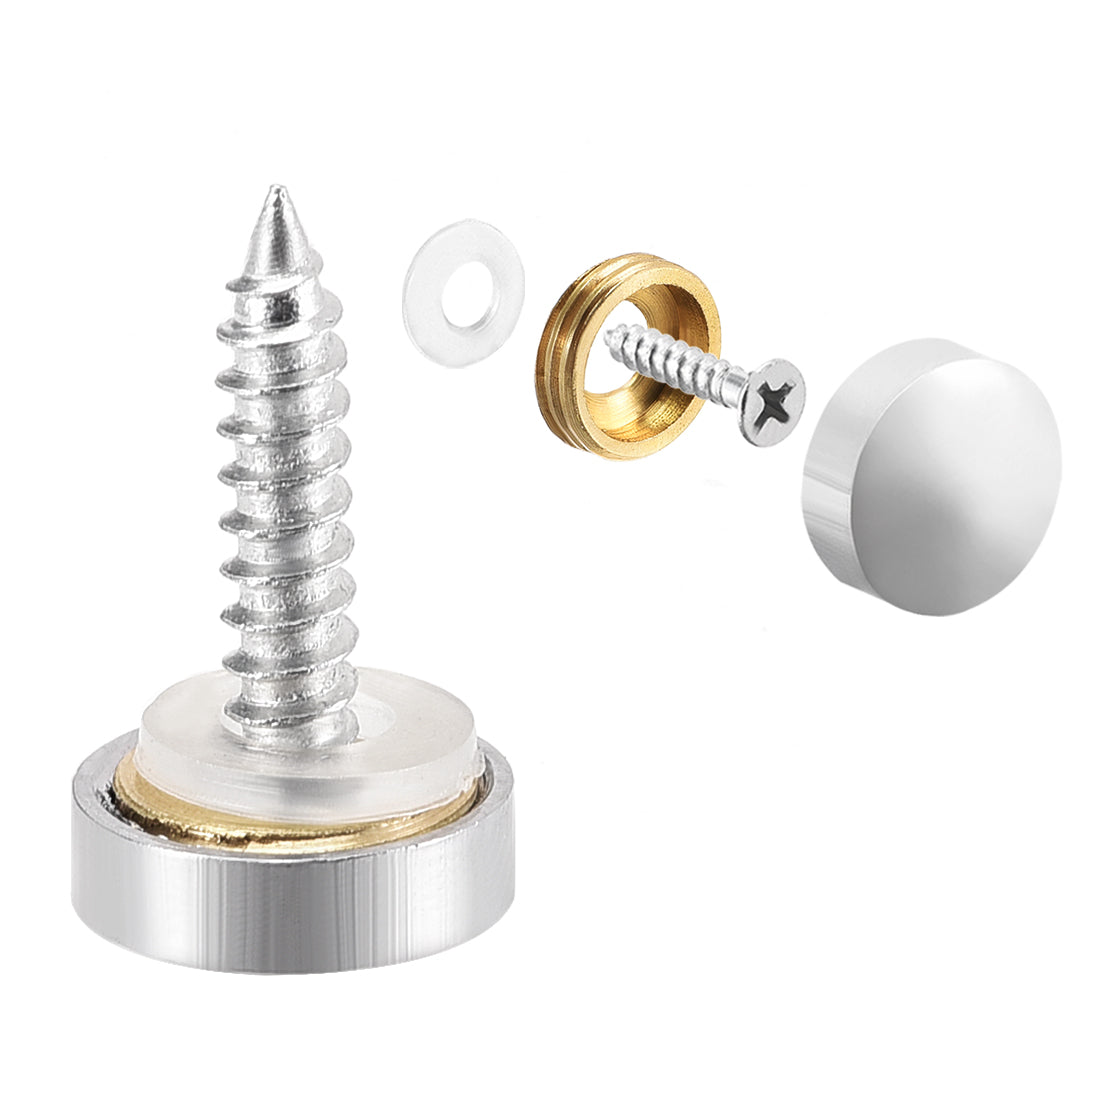 Uxcell Uxcell Mirror Screws, Decorative Cap Fasteners Cover Nails, Electroplated, Bright Silvery 14mm/0.55" Brass 12pcs